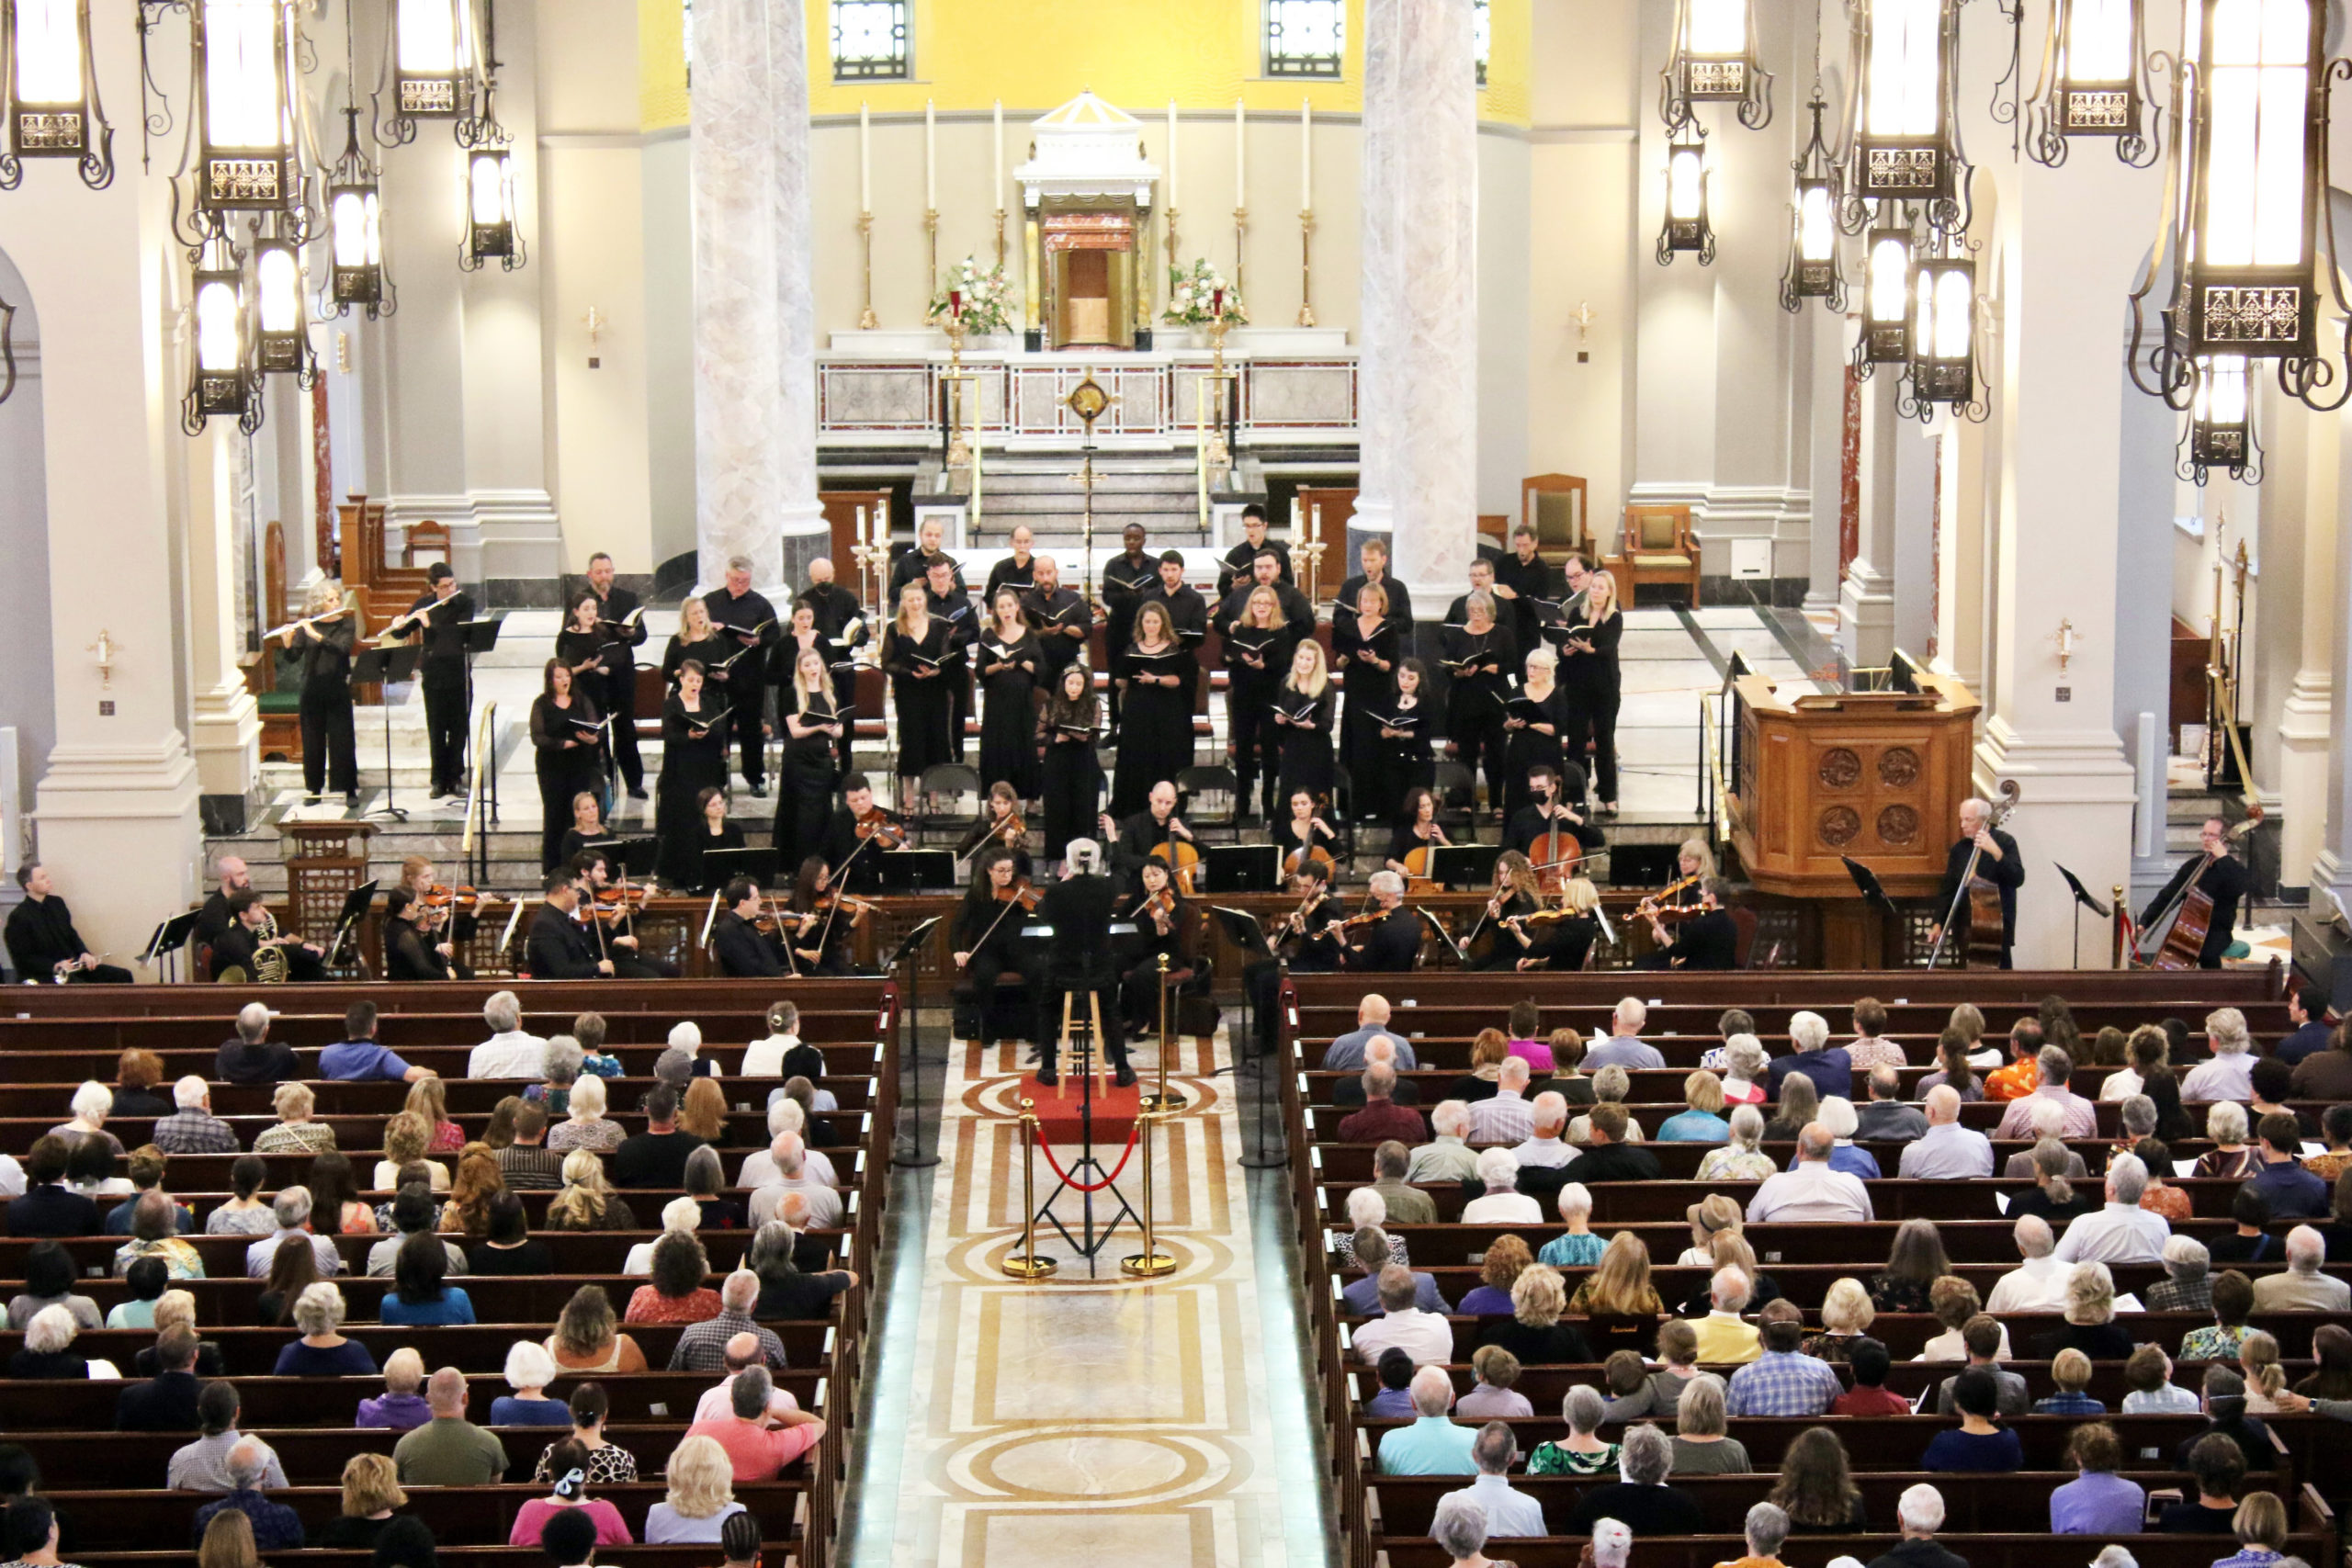 Cathedral Concert Series is a connection between Church and great